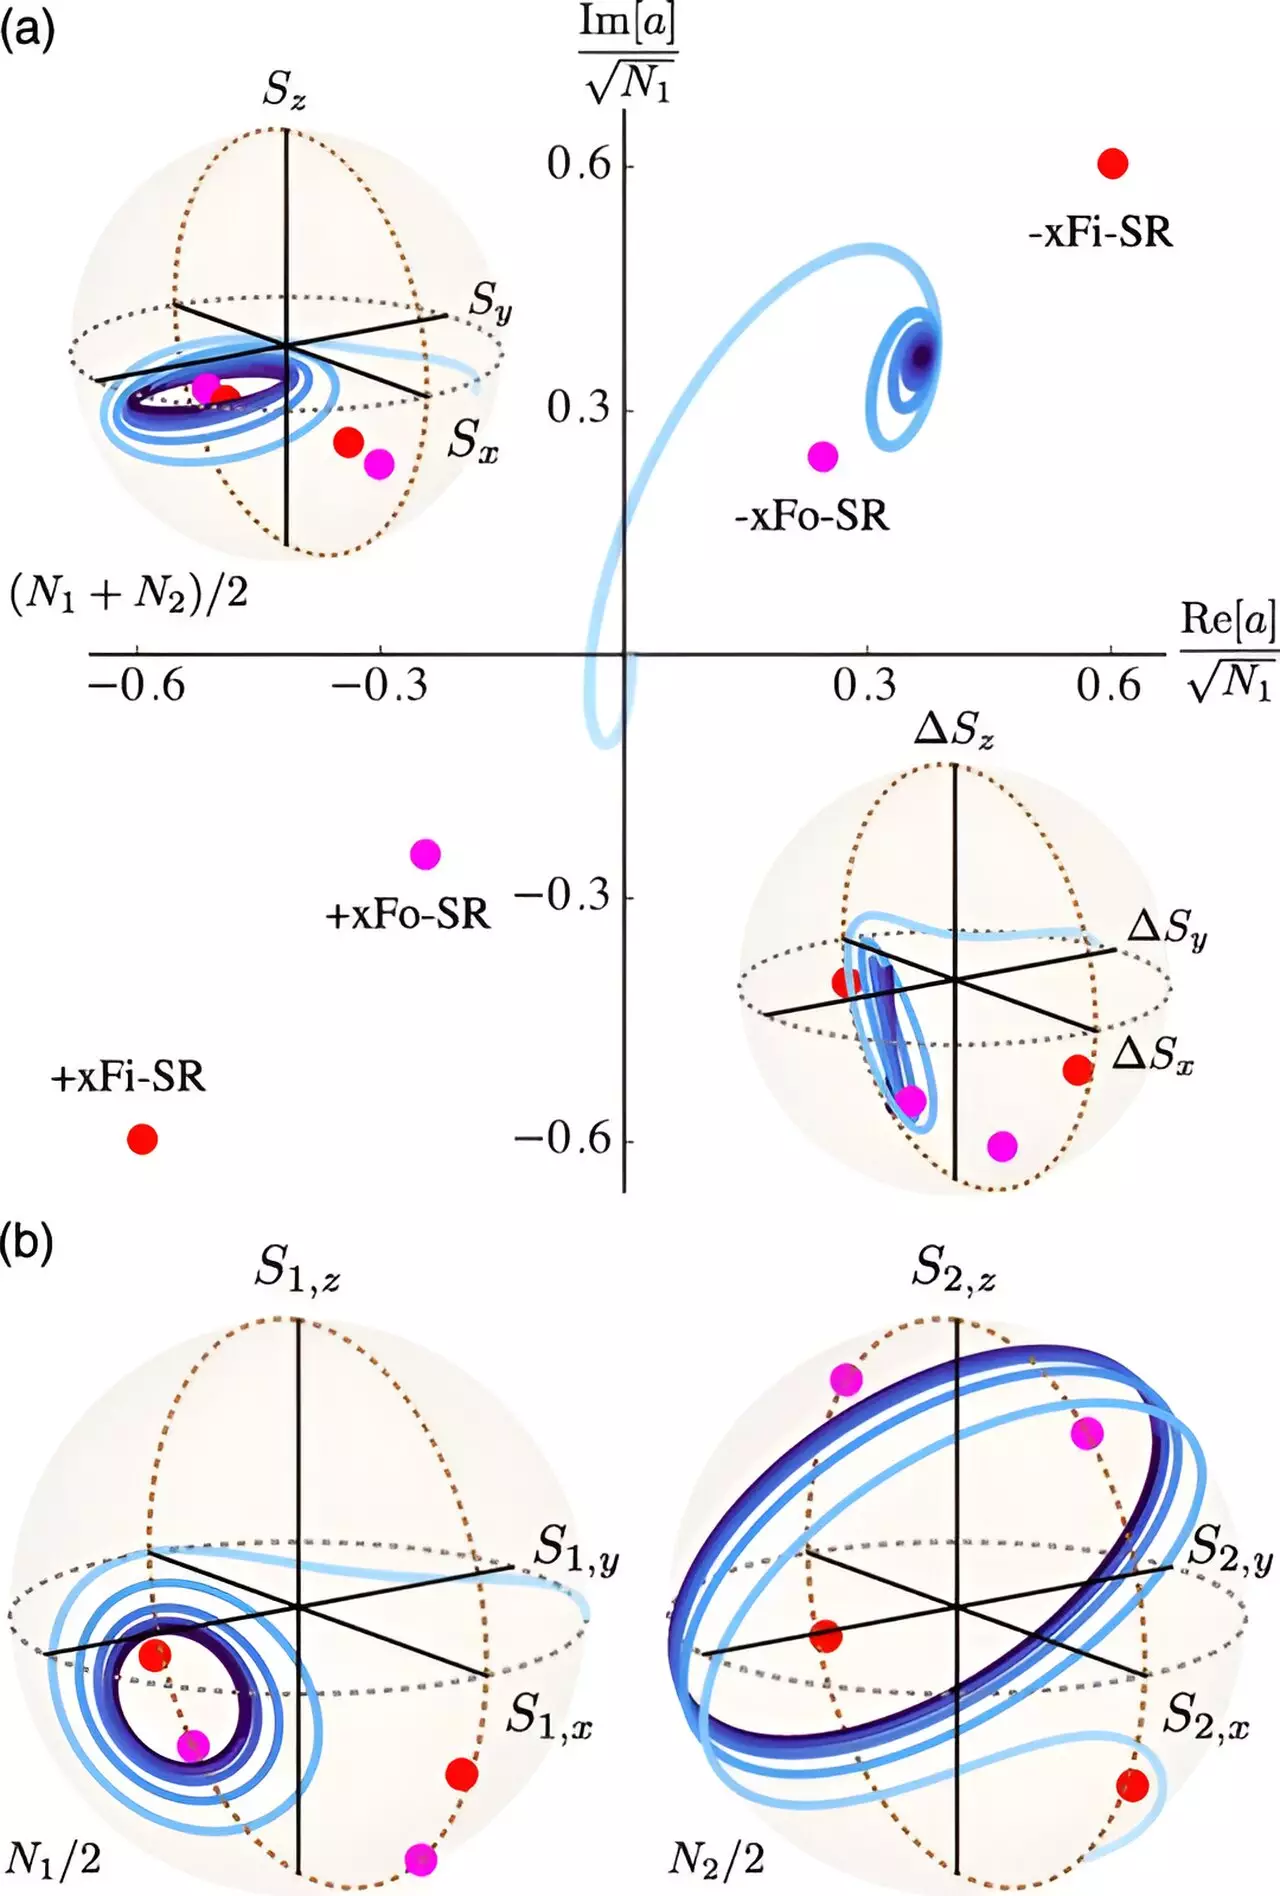 The Influence of Atom Interaction on Superradiance in Quantum Cavity